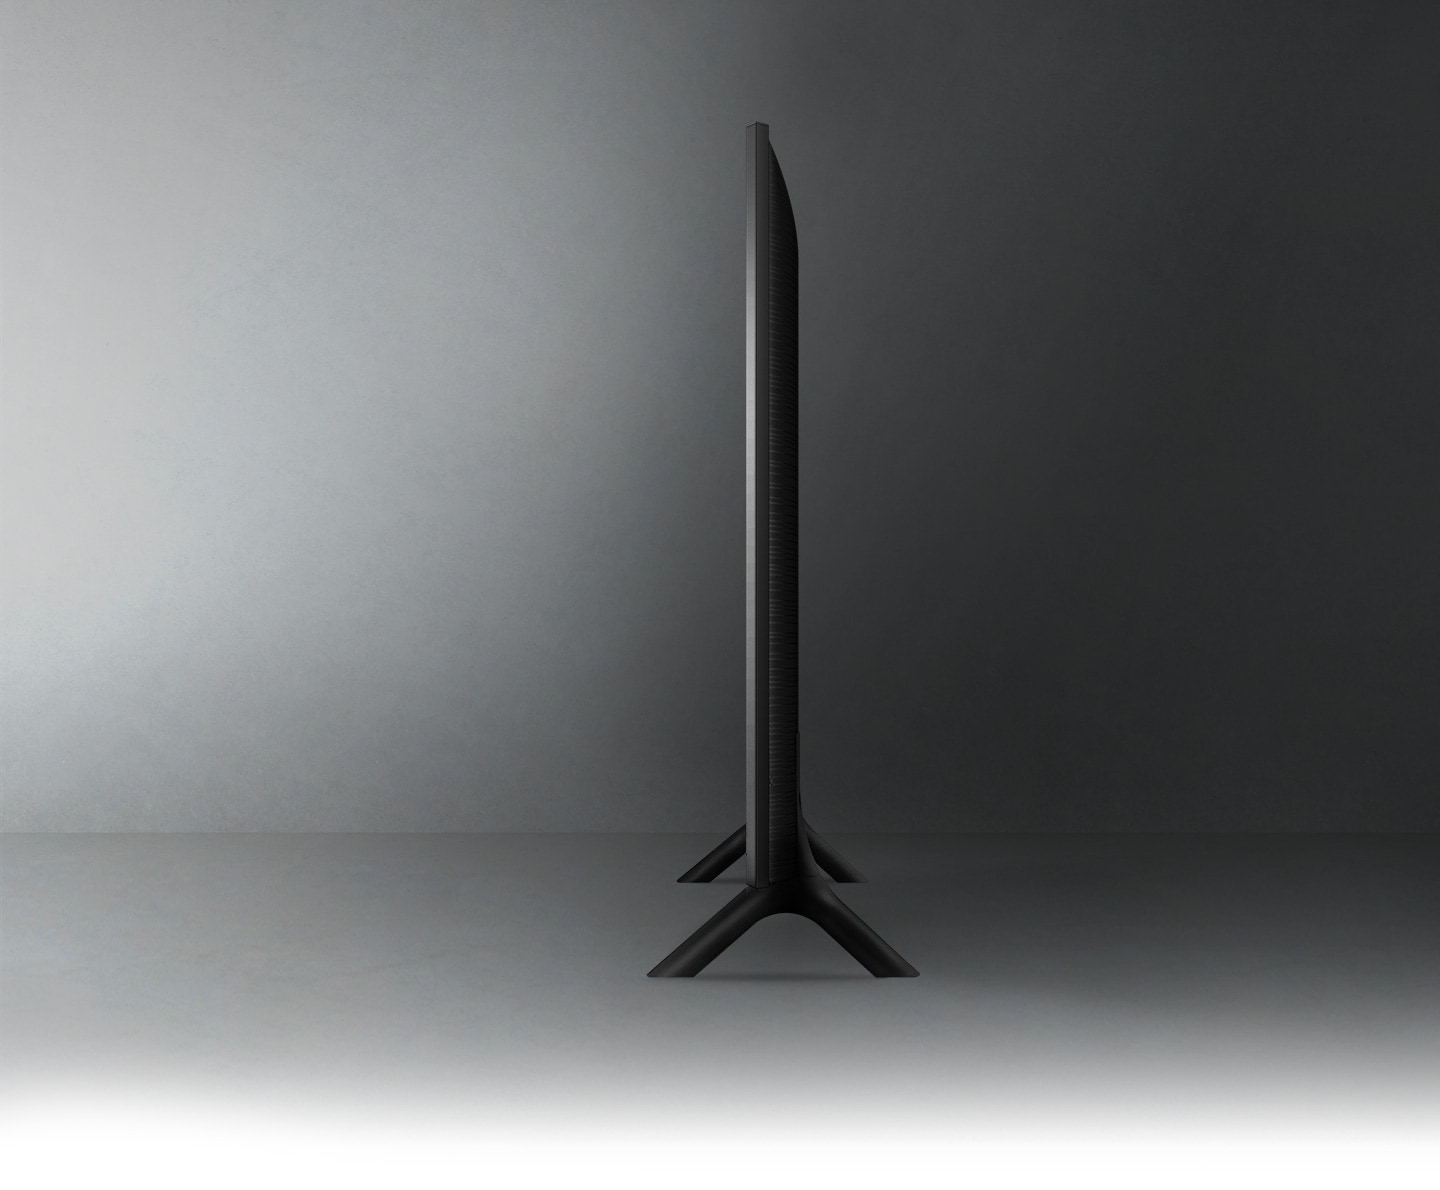 The profile view of the QLED TV shows the ultra-thin design of the QLED AirSlim TV.